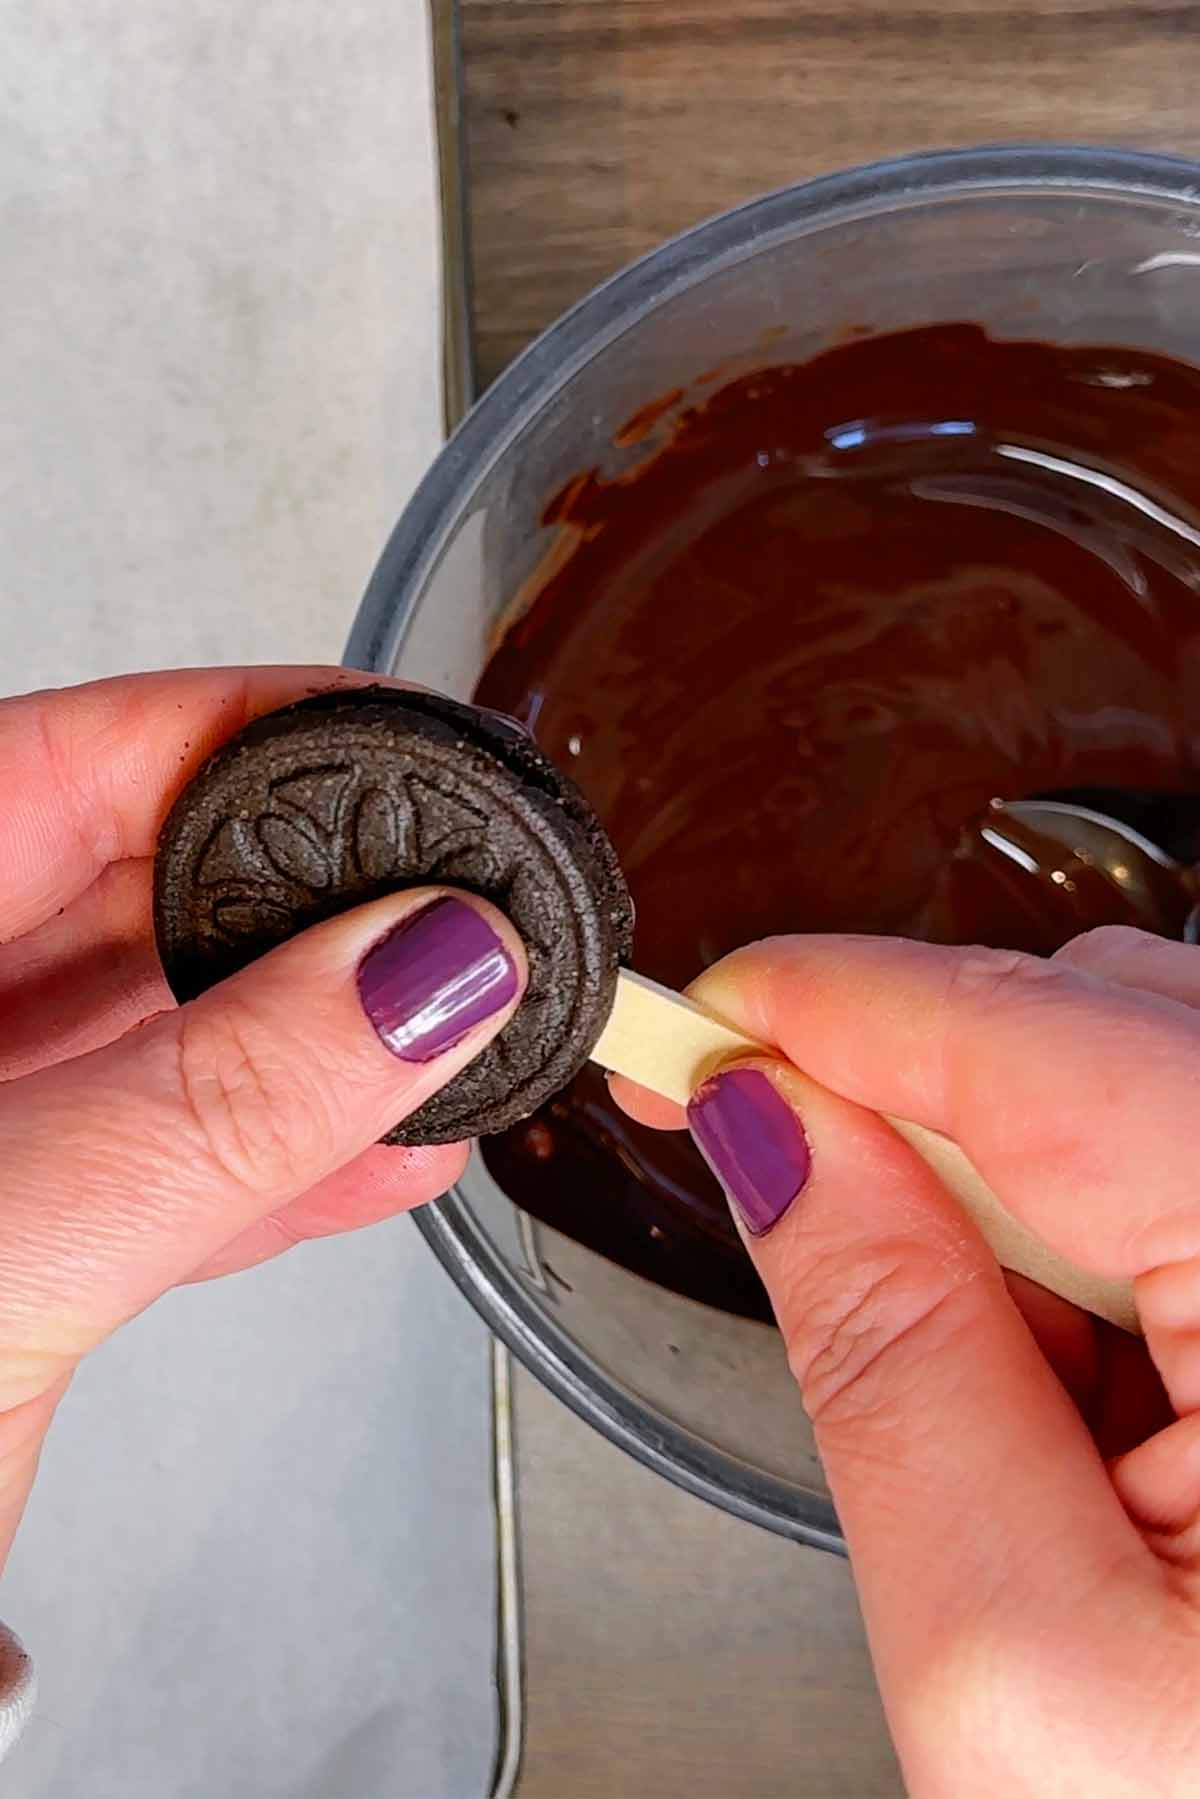 A lollipop stick being pushed into an Oreo cookie.